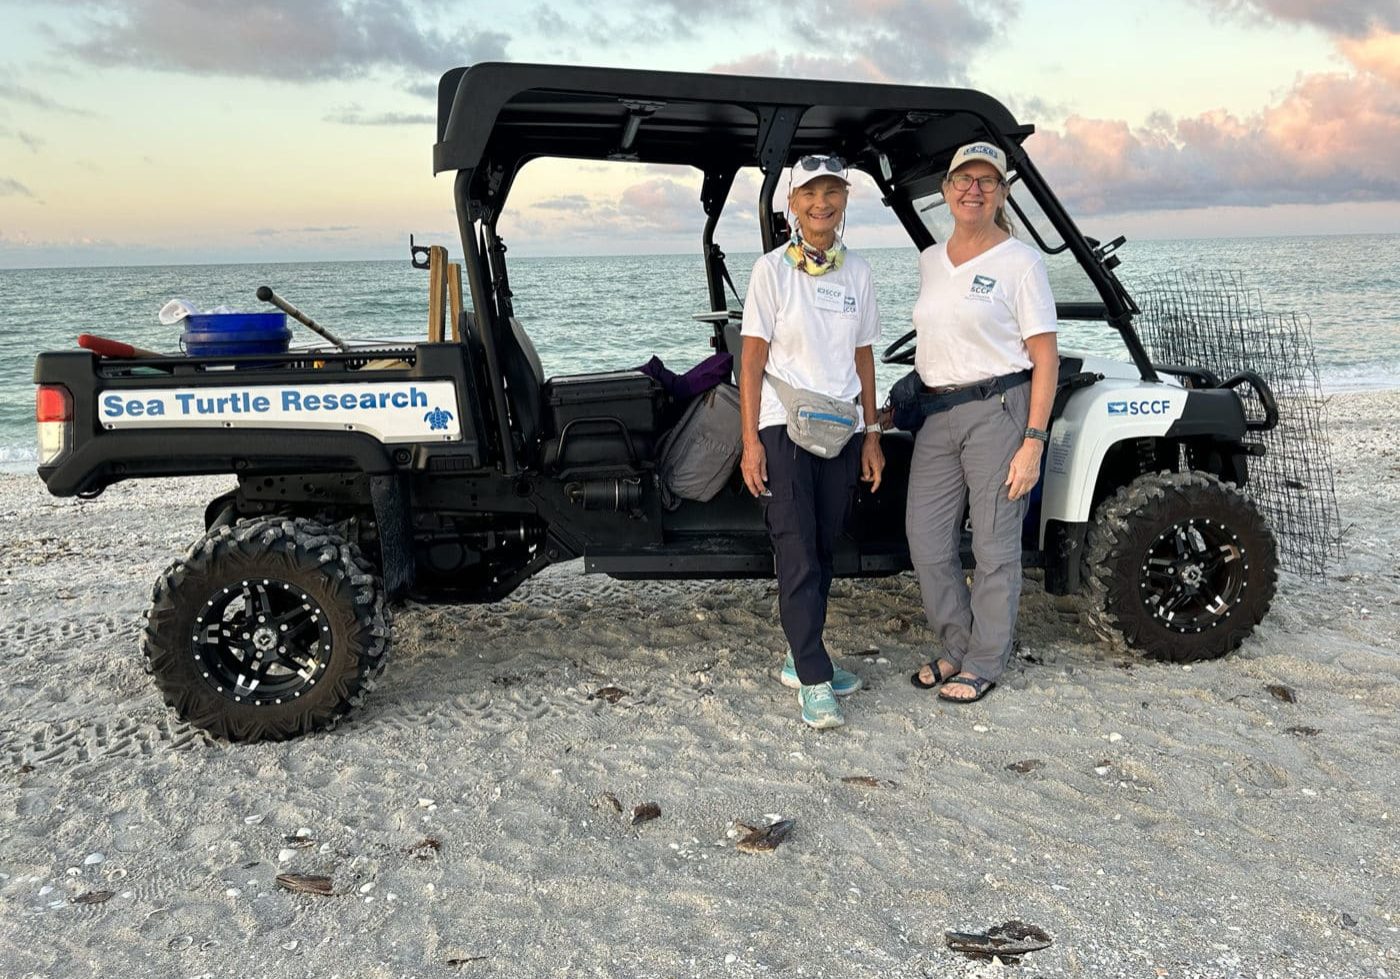 two women standing on beach in front of ATV